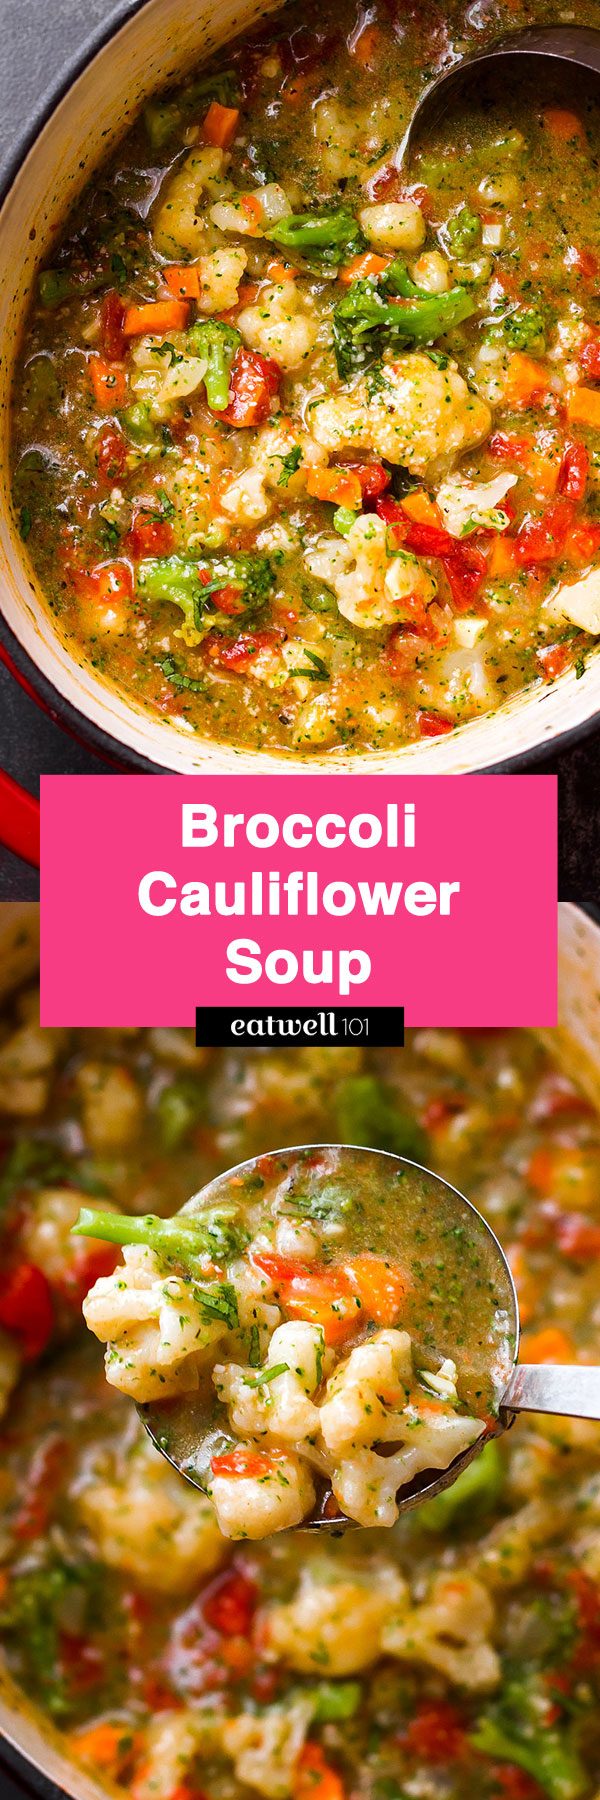 Broccoli Cauliflower Soup Recipe — #eatwell101 #recipe A super nutritious #soup #recipe ready in 15 minutes. #Paleo #low-carb #whole30 #gluten-free friendly!